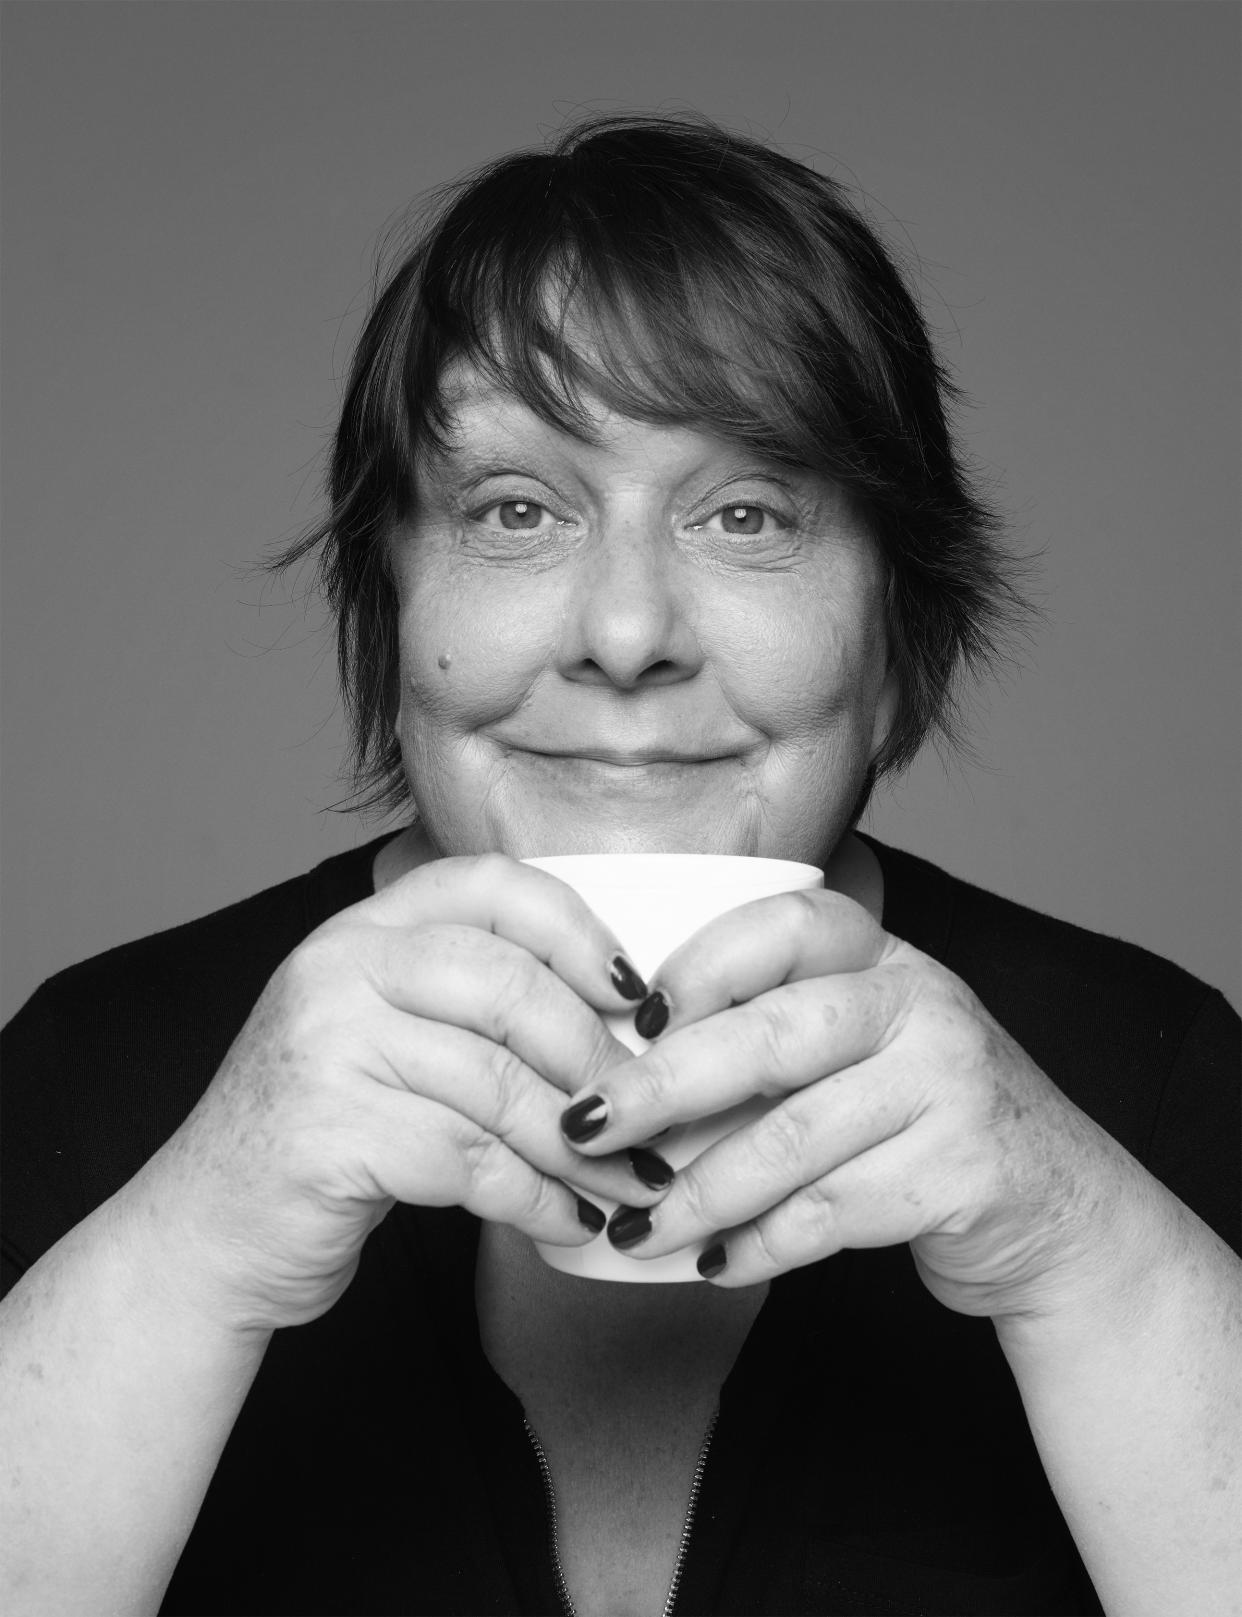 Kathy Burke photographed by Rankin to support the WorldÕs Biggest Coffee Morning charity event, supporting Macmillan Cancer SupportÕs flagship annual fundraiser. (Rankin/Macmillan/PA Images)